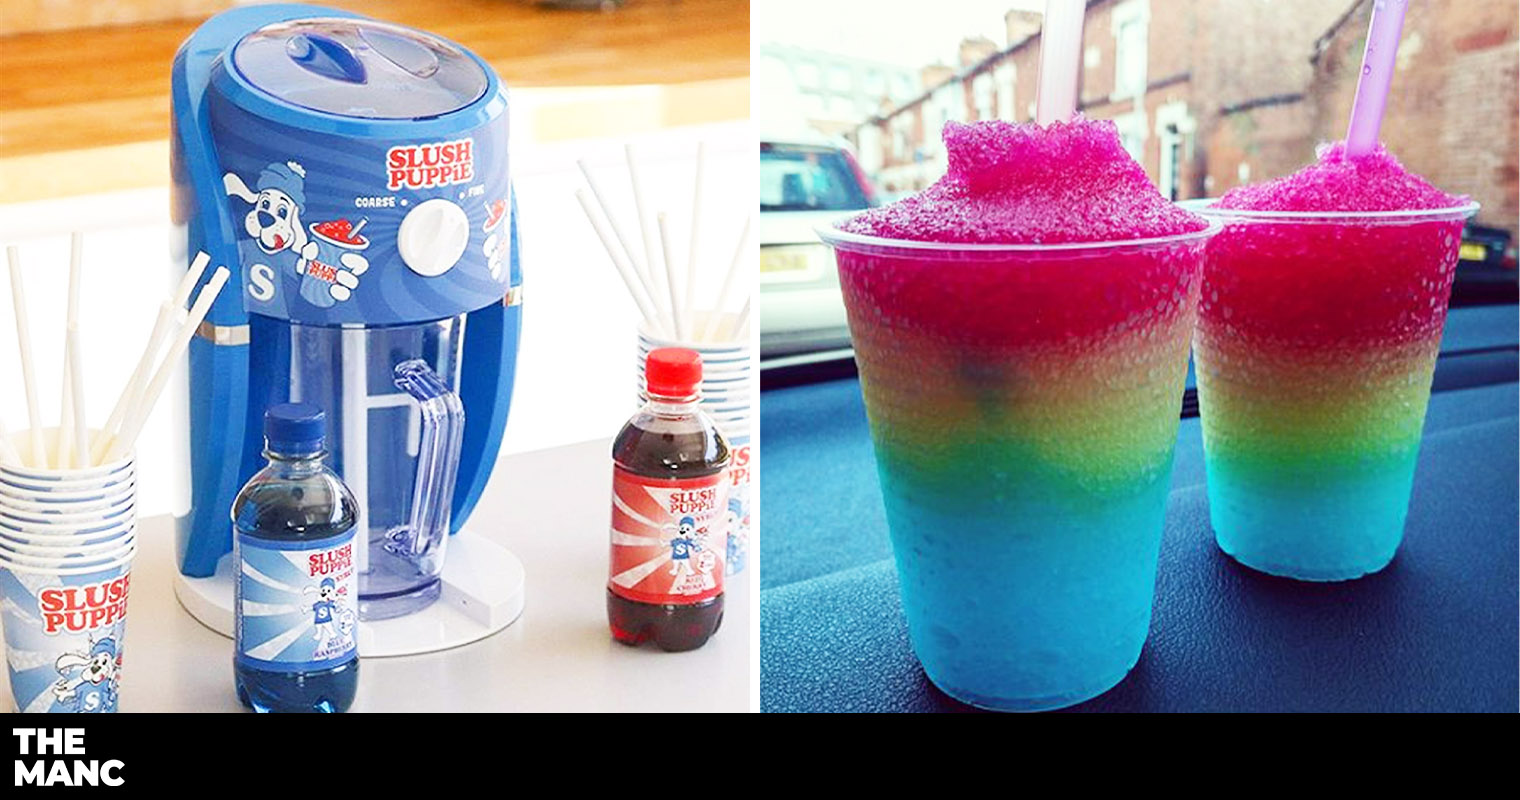 This Slush Puppie machine is the perfect summer buy as we